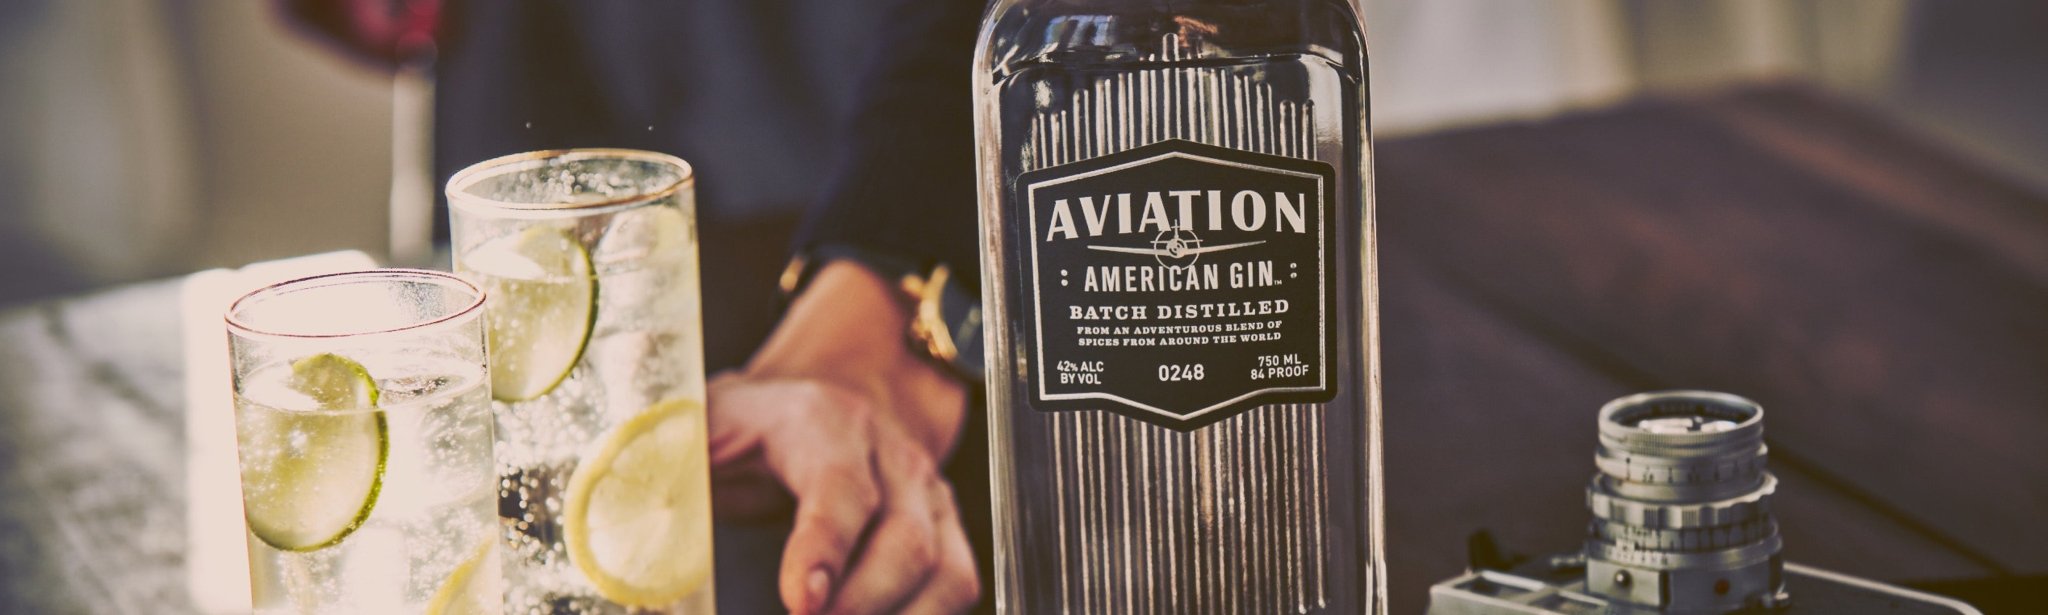 Aviation - The Bottle Club